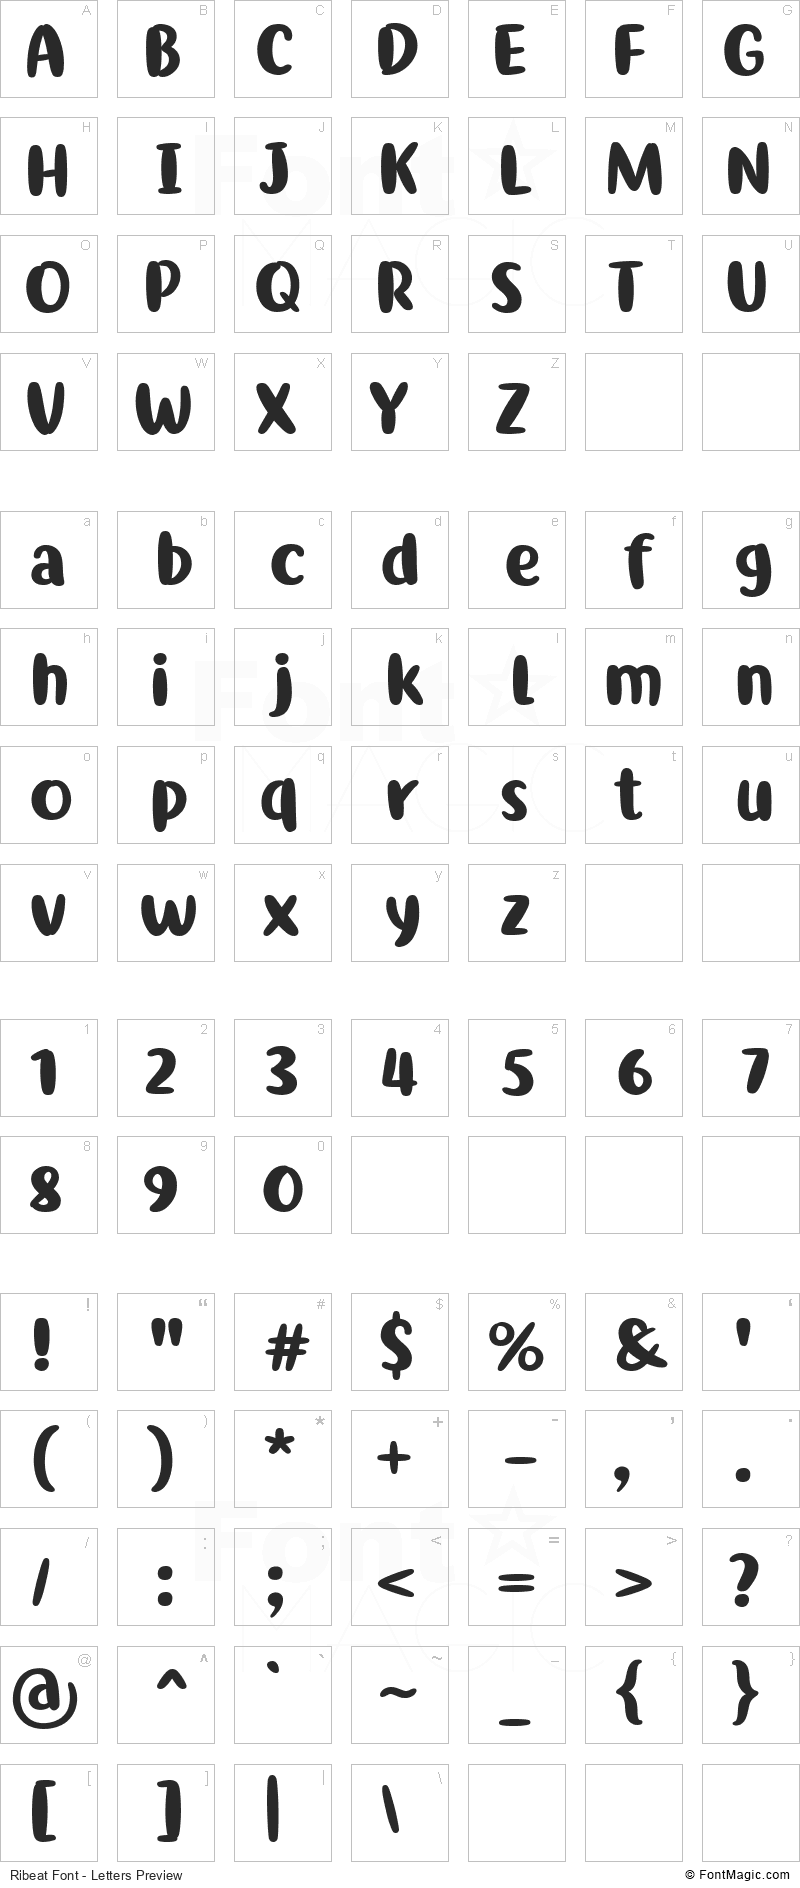 Ribeat Font - All Latters Preview Chart